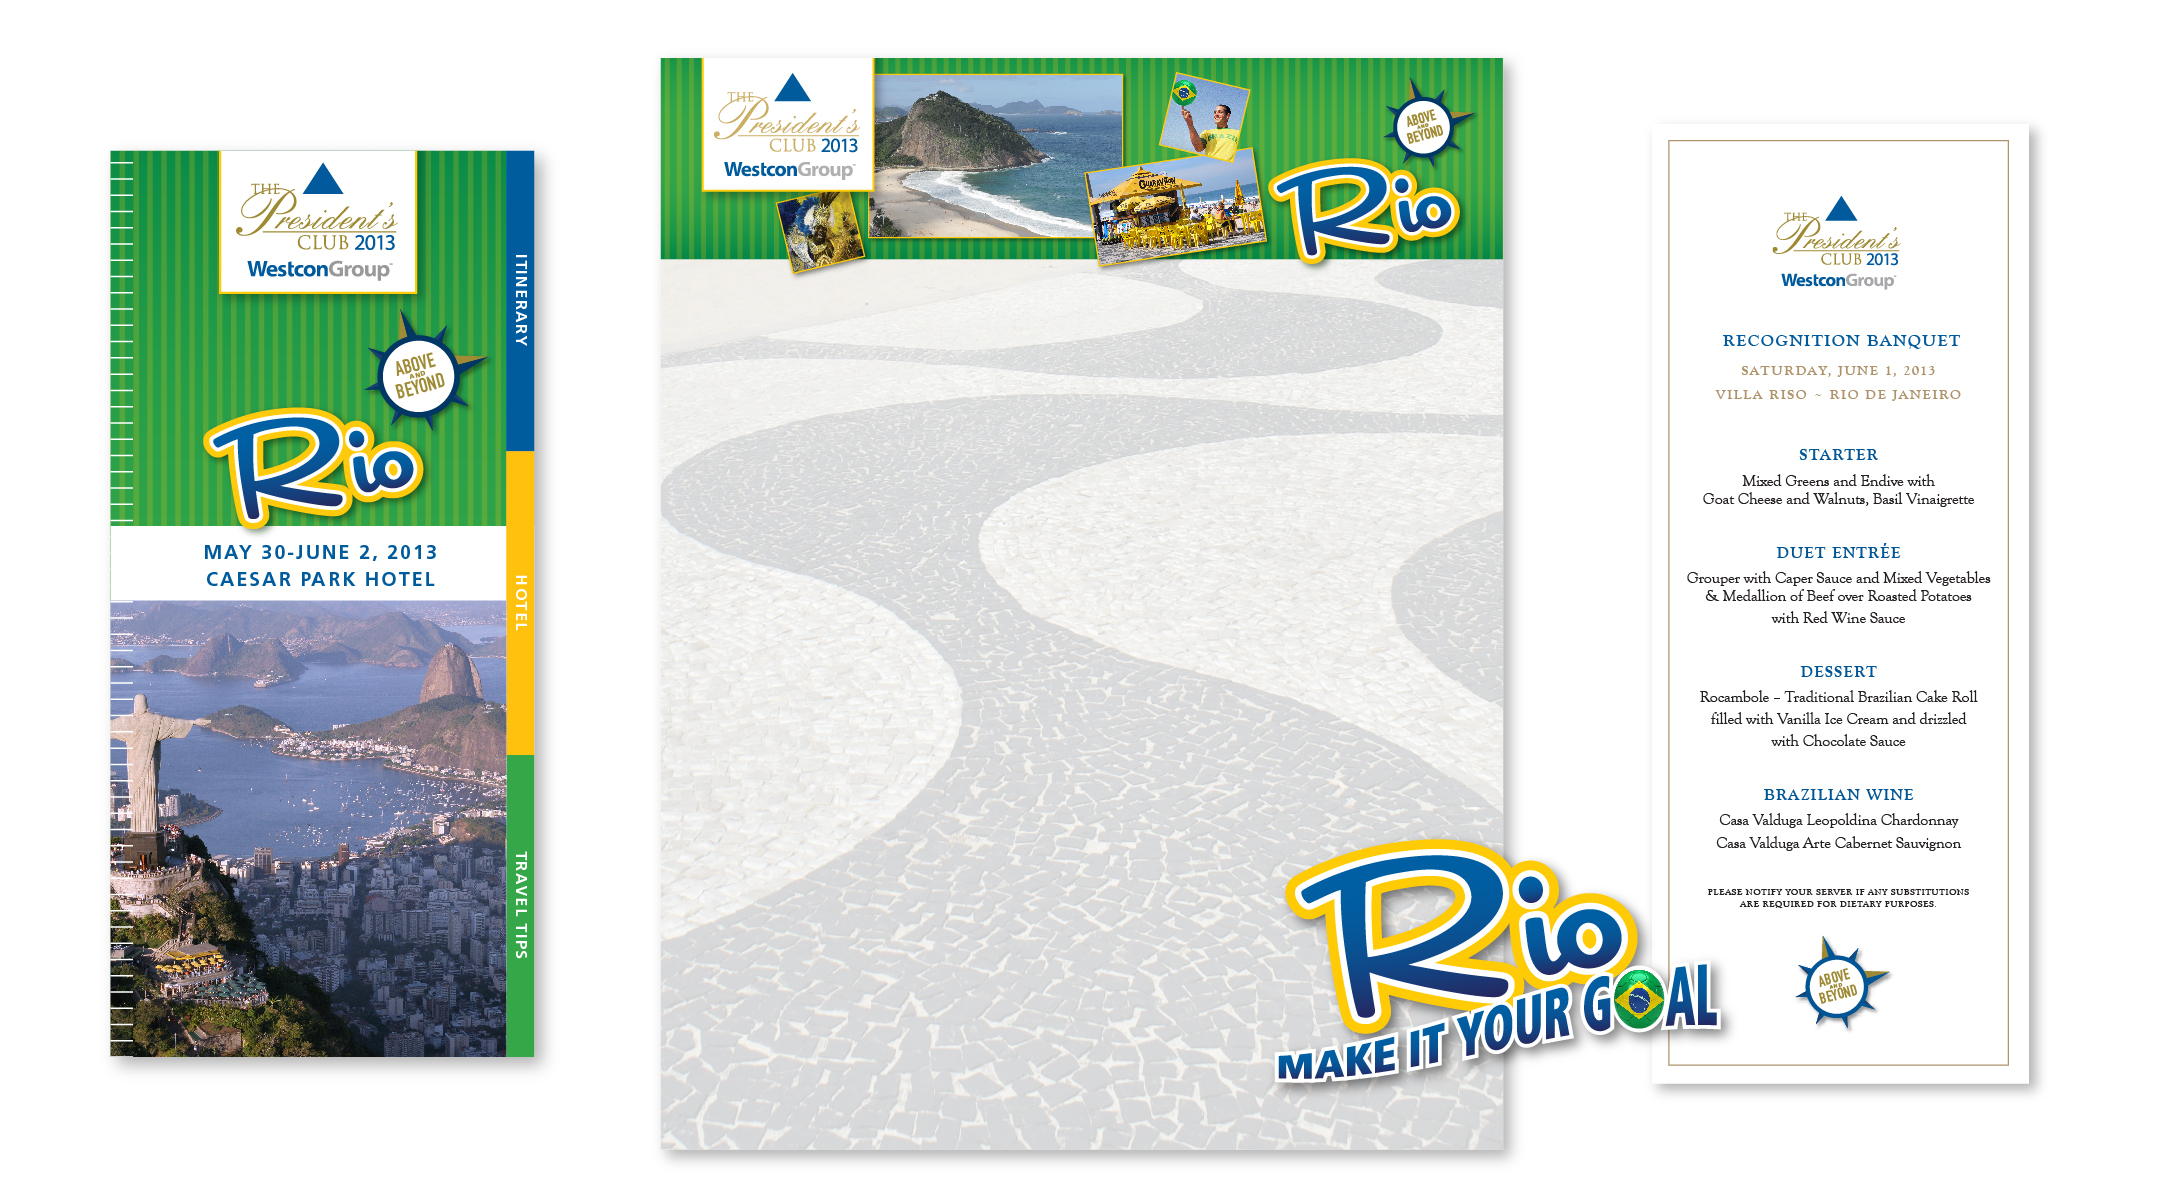 Corporate Incentive Award trip to Rio, created for MADISON. Includes overarching theme logo design, program of events, letterhead, and gala dinner menu.